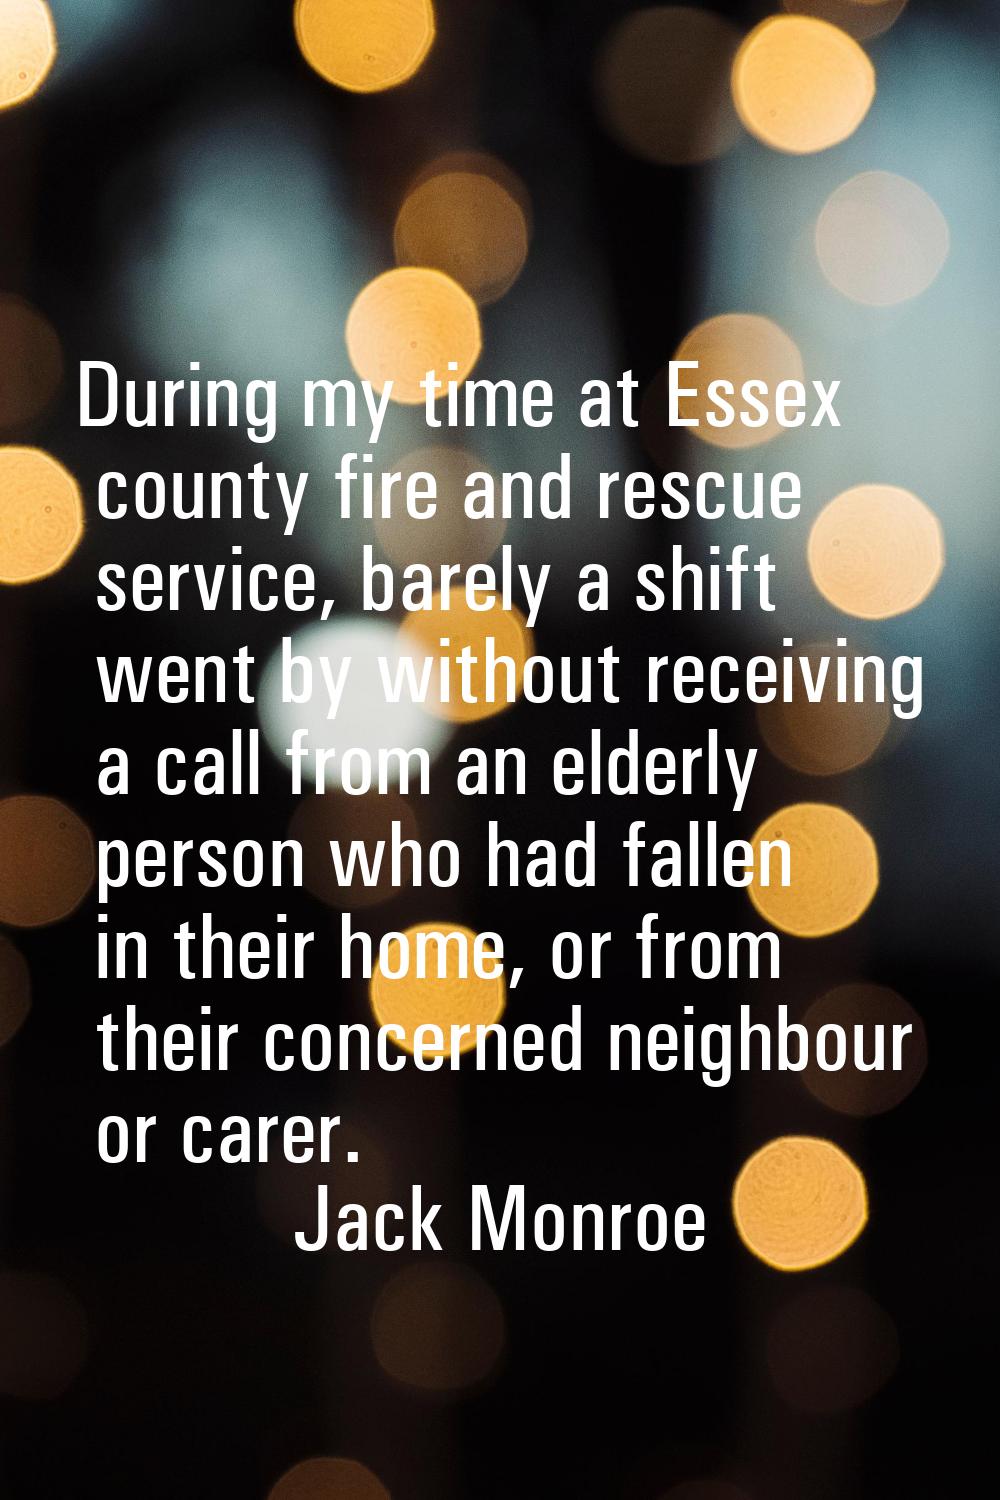 During my time at Essex county fire and rescue service, barely a shift went by without receiving a 